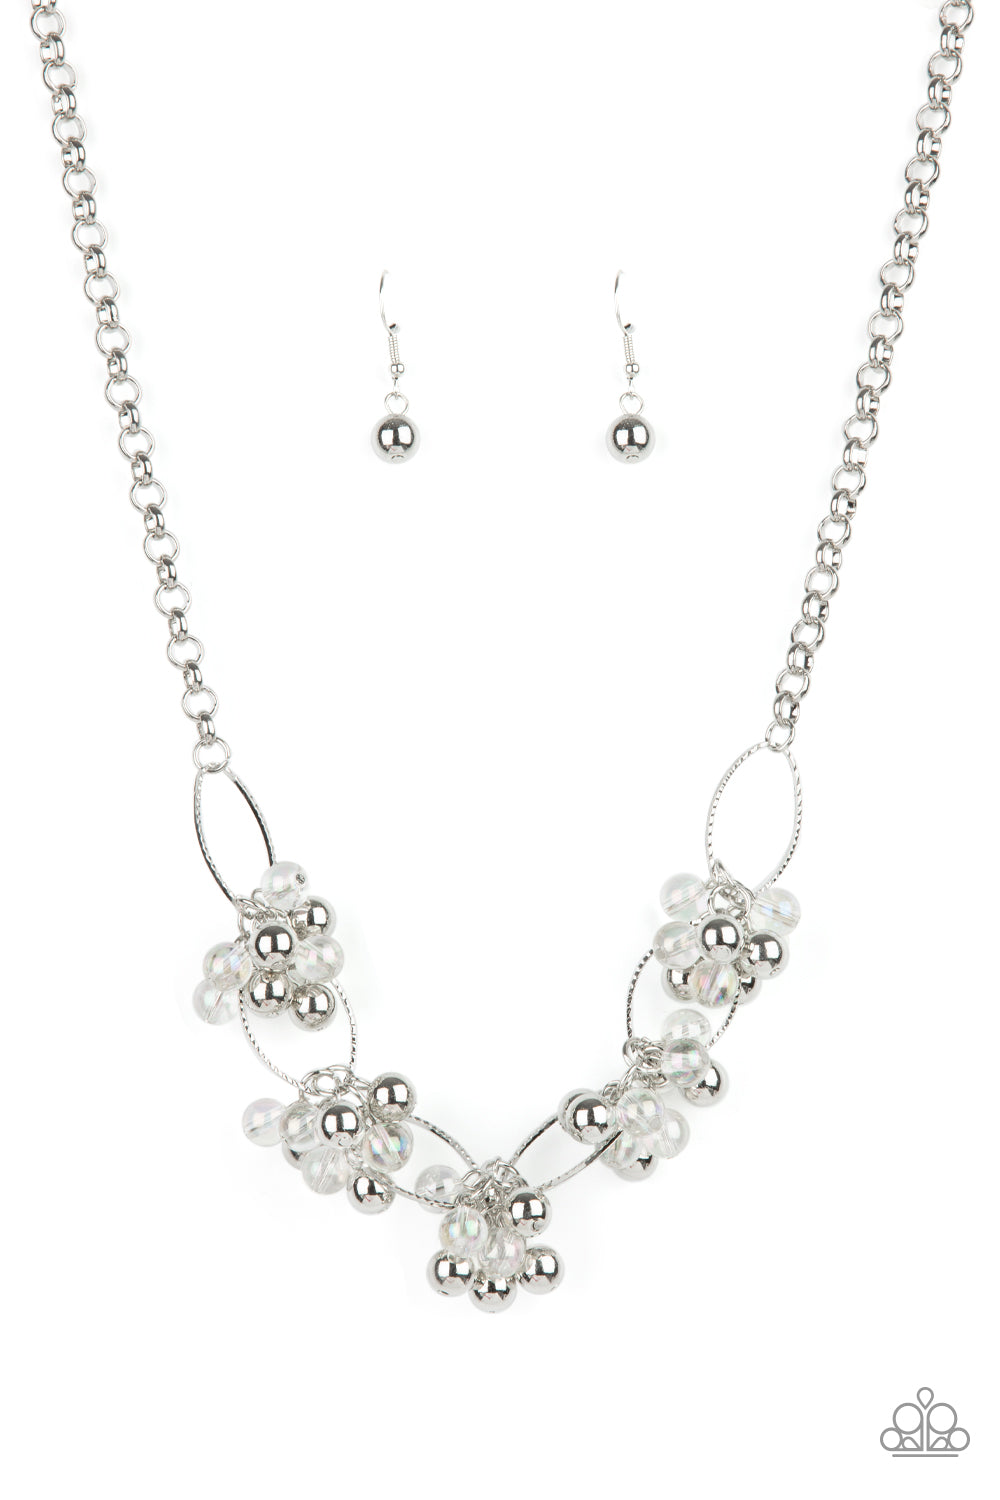 Effervescent Ensemble - Iridescent Multi - July 2021 Paparazzi Life of the Party Necklace